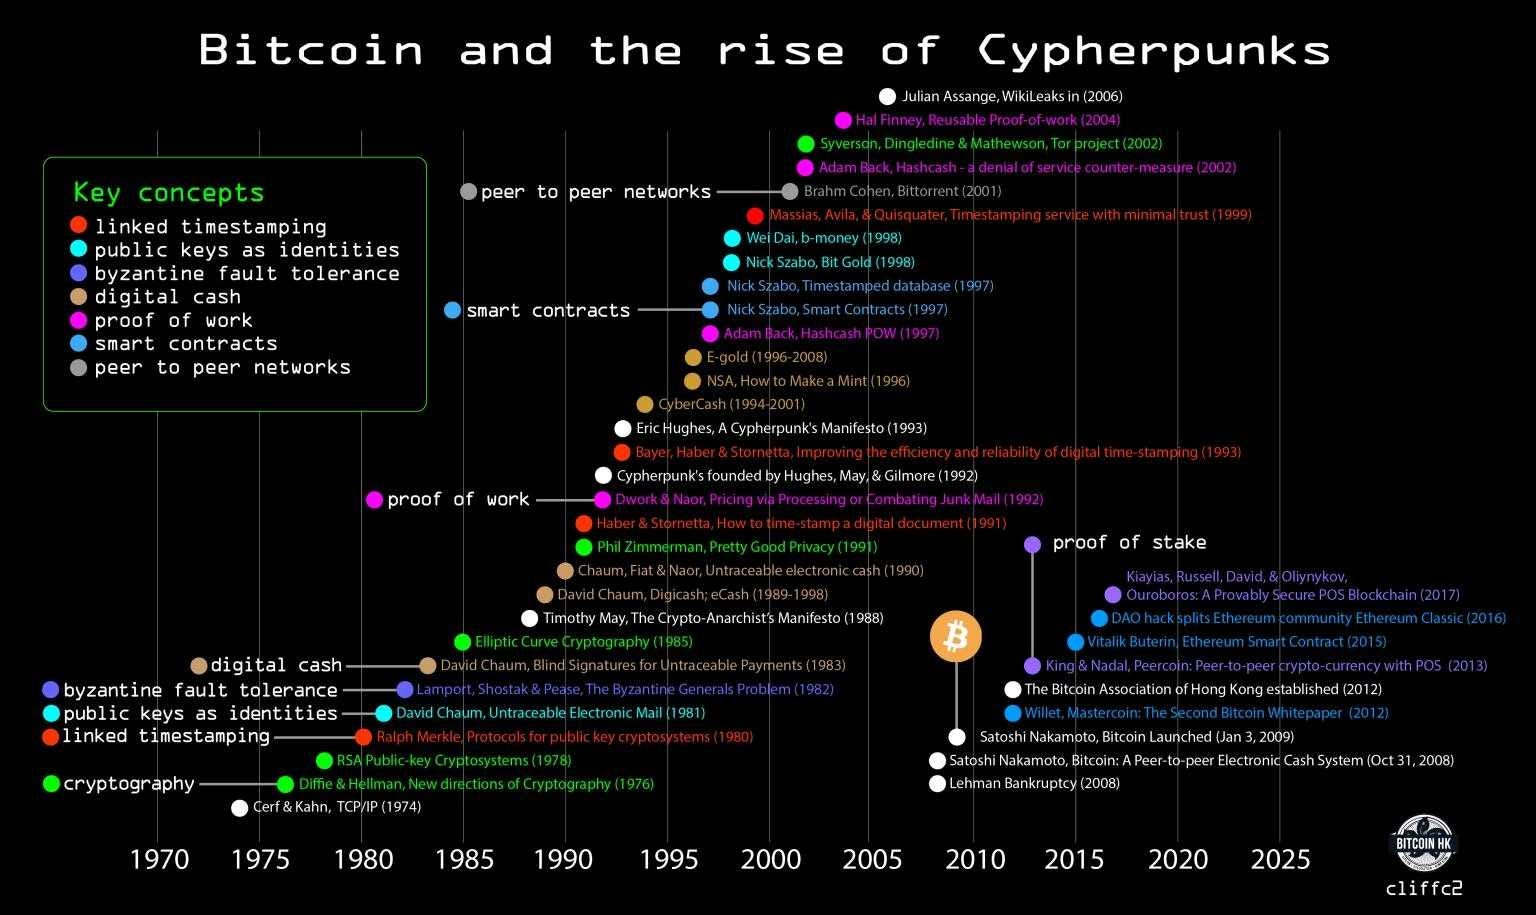 elixxir.io on Twitter: "Bitcoin and the rise of Cypherpunks. @chaumdotcom  will forever be a part of history! #Crypto #Blockchain #Cypherpunks  https://t.co/0vg6yyOWSw" / Twitter